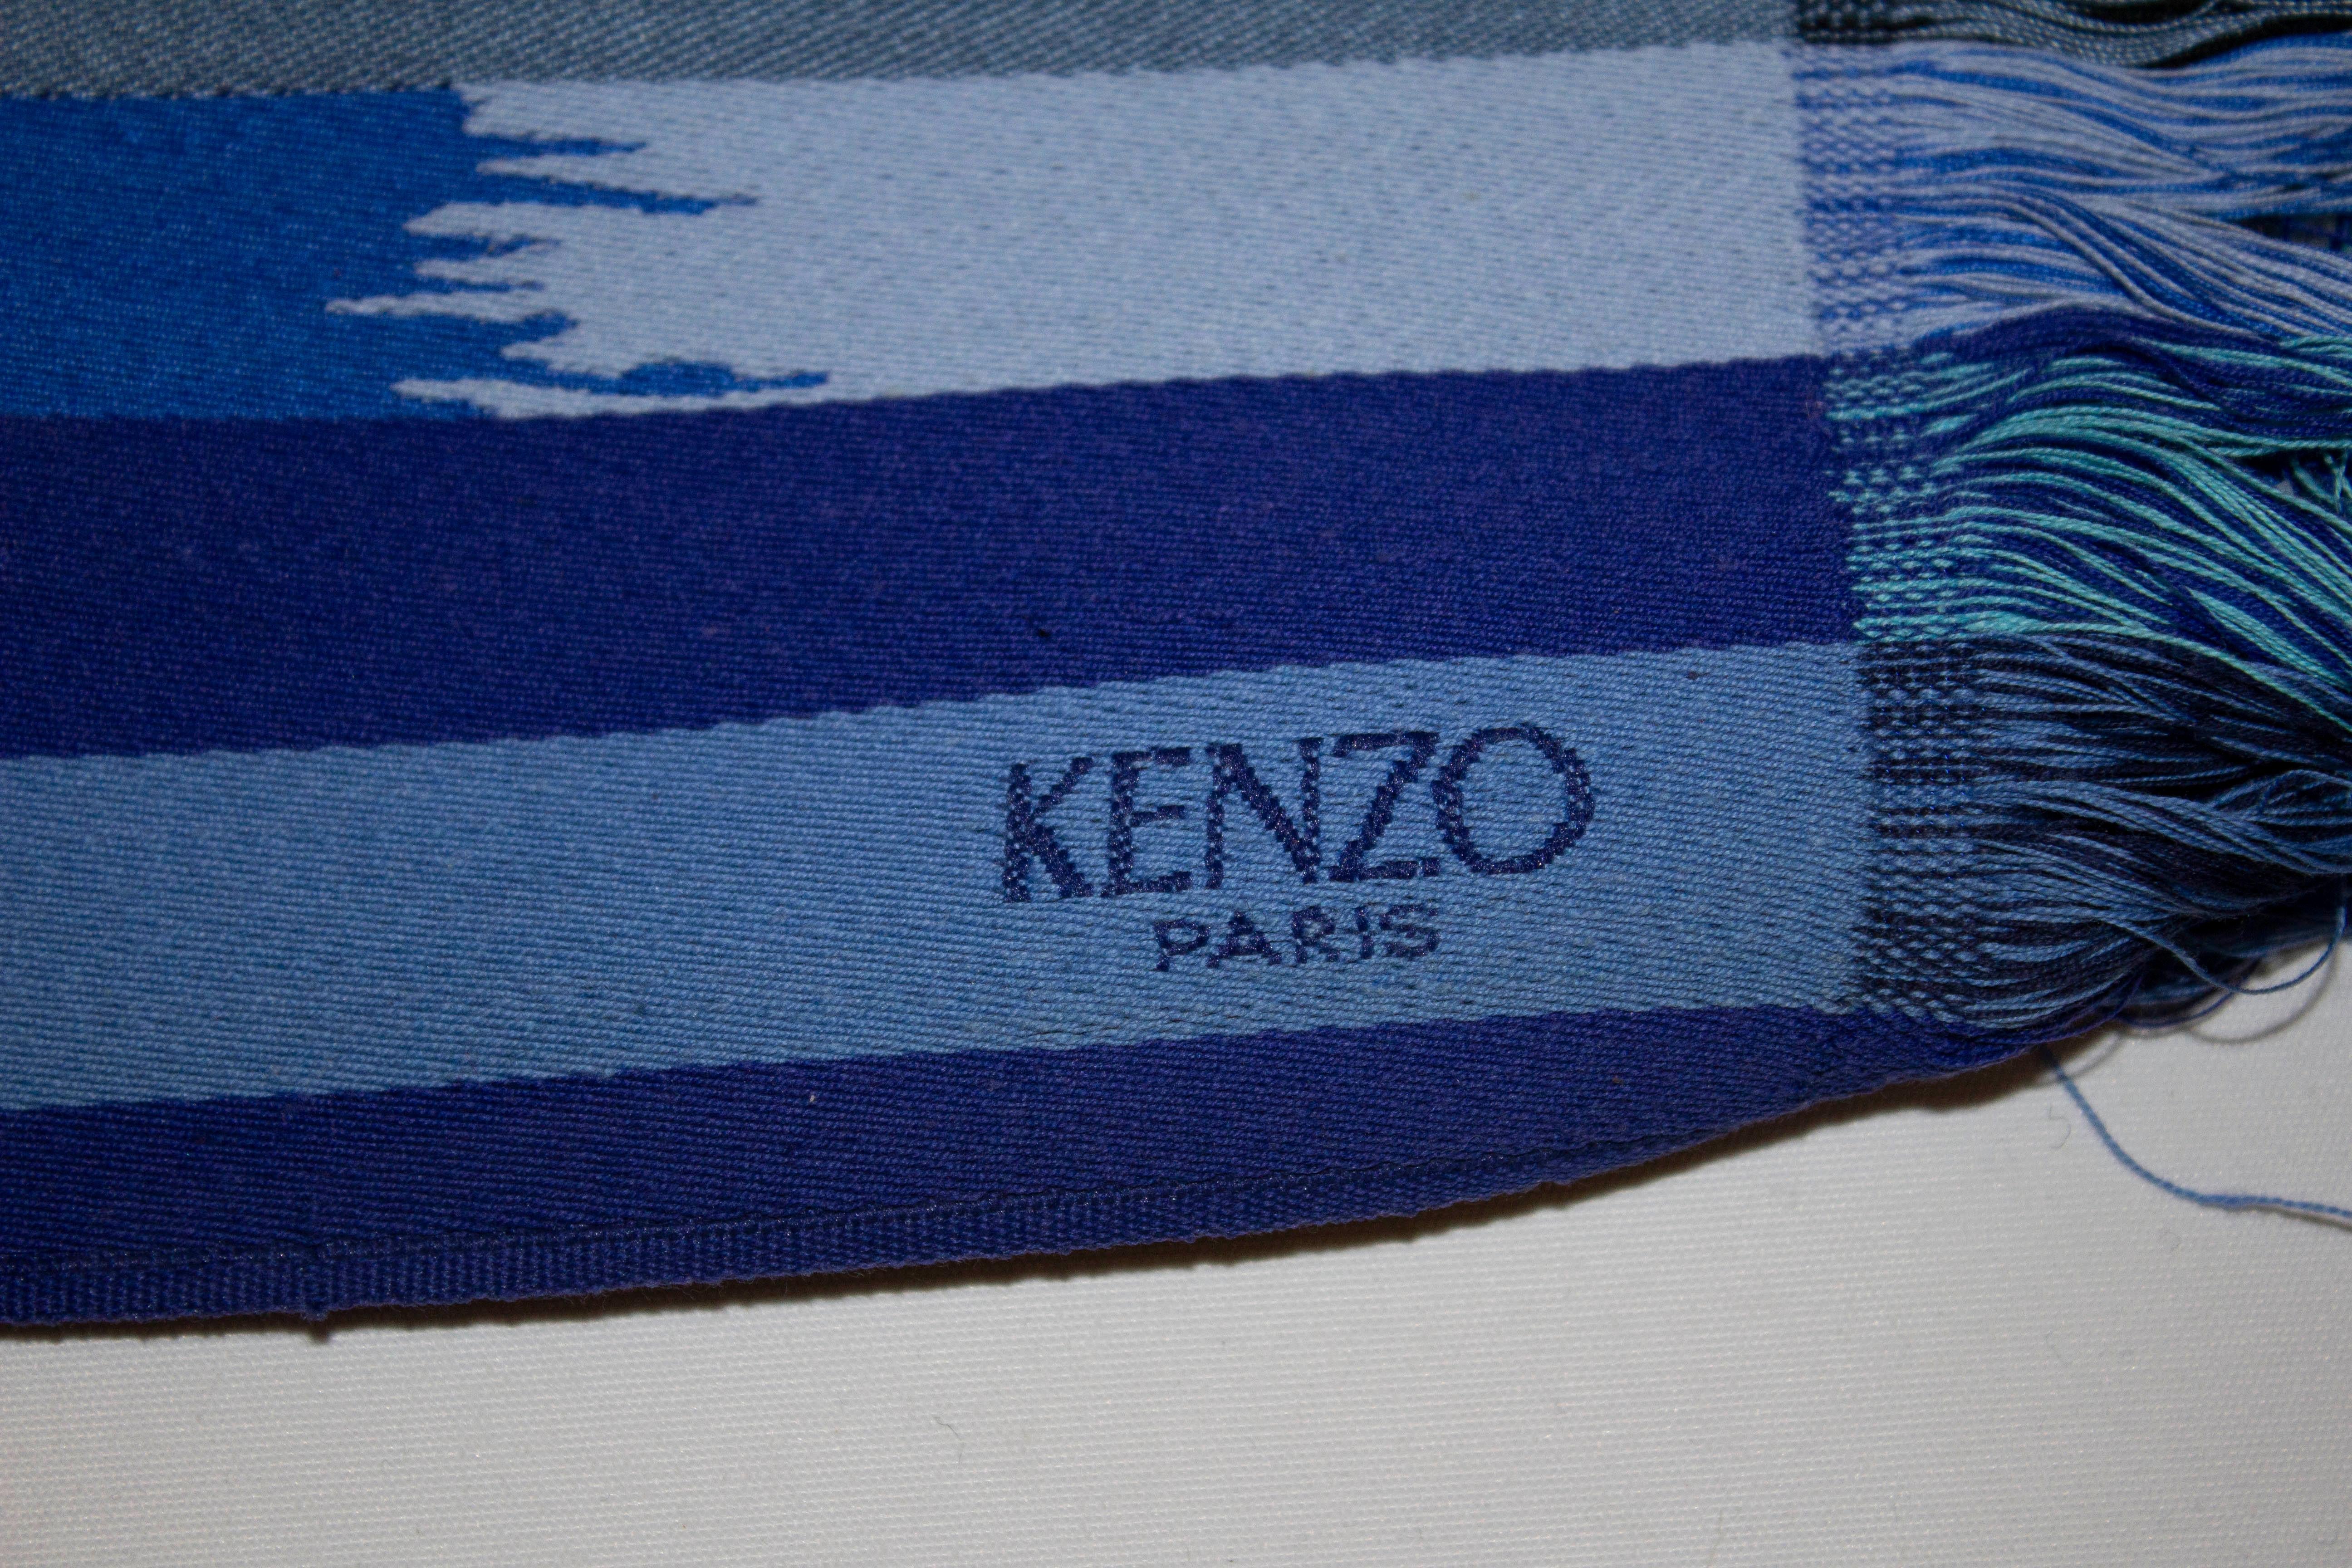 A great belt for Spring / Summer by Kenzo Paris. This obi style belt is in a blue strip colour miz with fringe detail. Measurements: Height 4 1/2'', length 76'' without fringing.